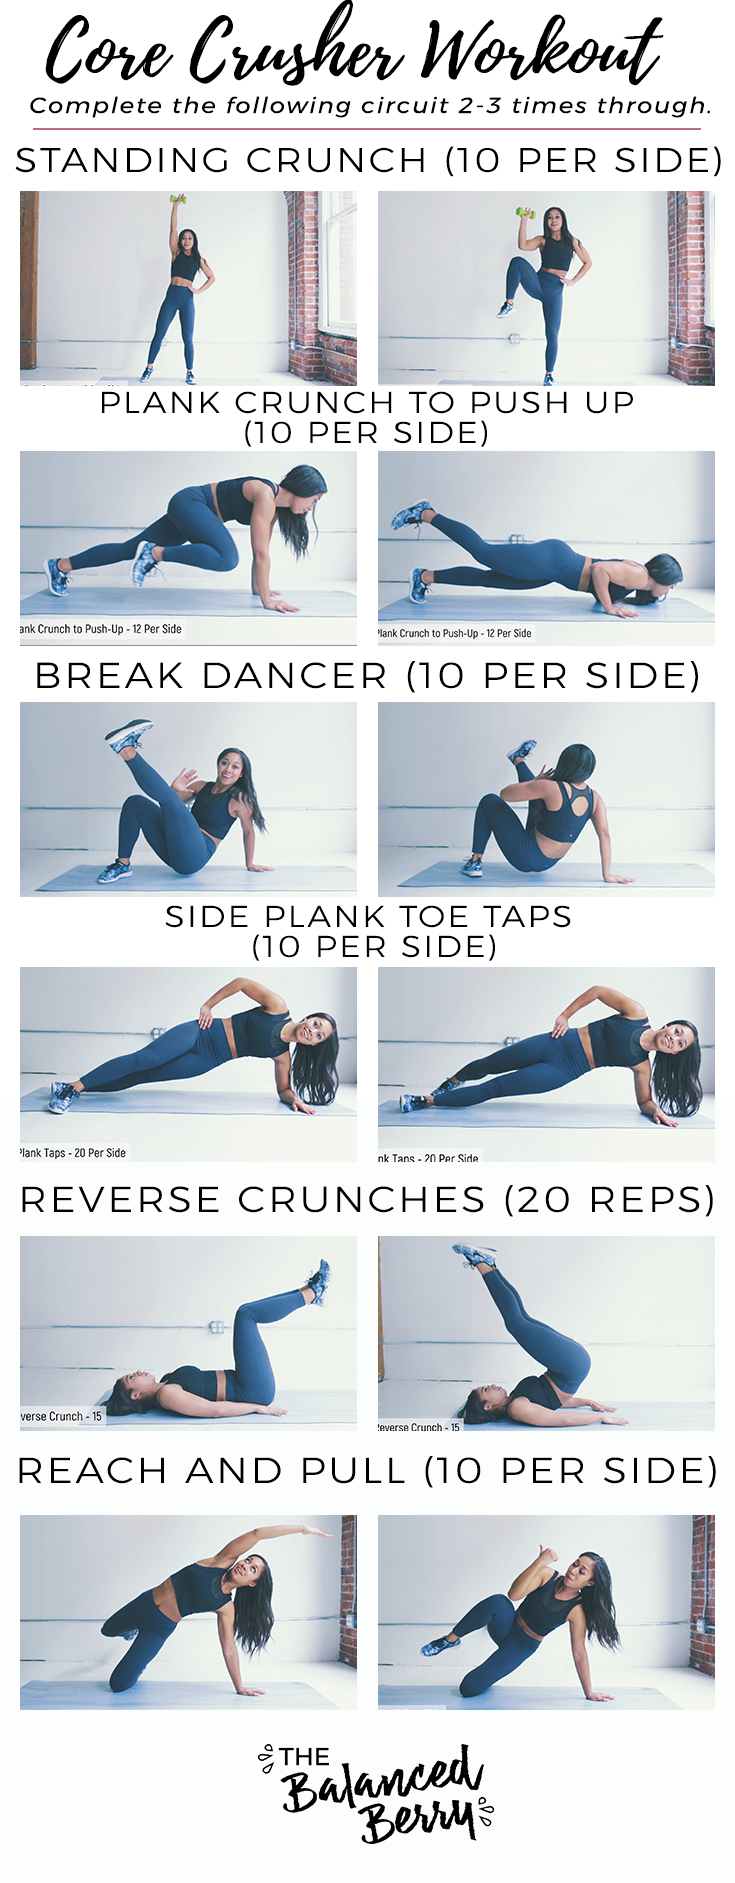 This ab workout will strengthen your entire core. It's a circuit of some of my favorite moves to fire up and strengthen your midsection. All you need is a pair of light dumbbells to get started.